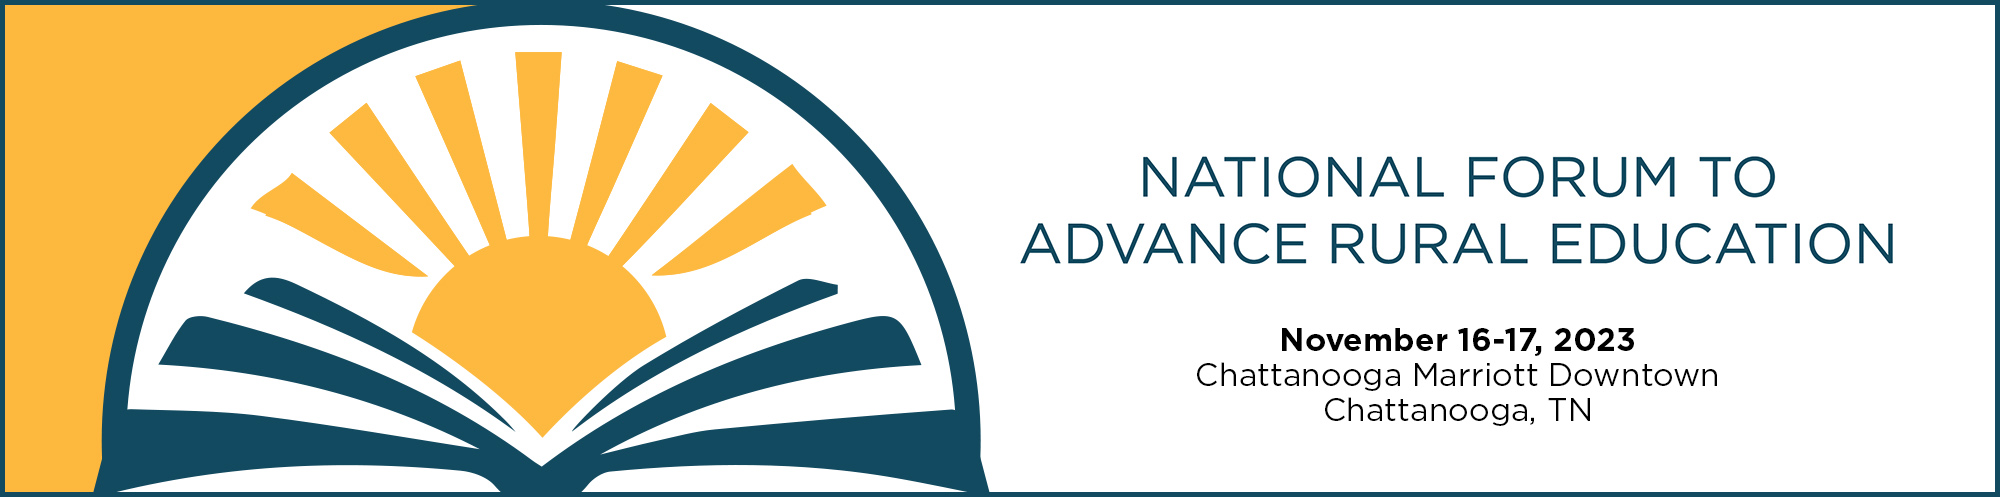 National Forum to Advance Rural Education November 16-17, 2023 Chattanooga Marriott Downtown Chattanooga TN